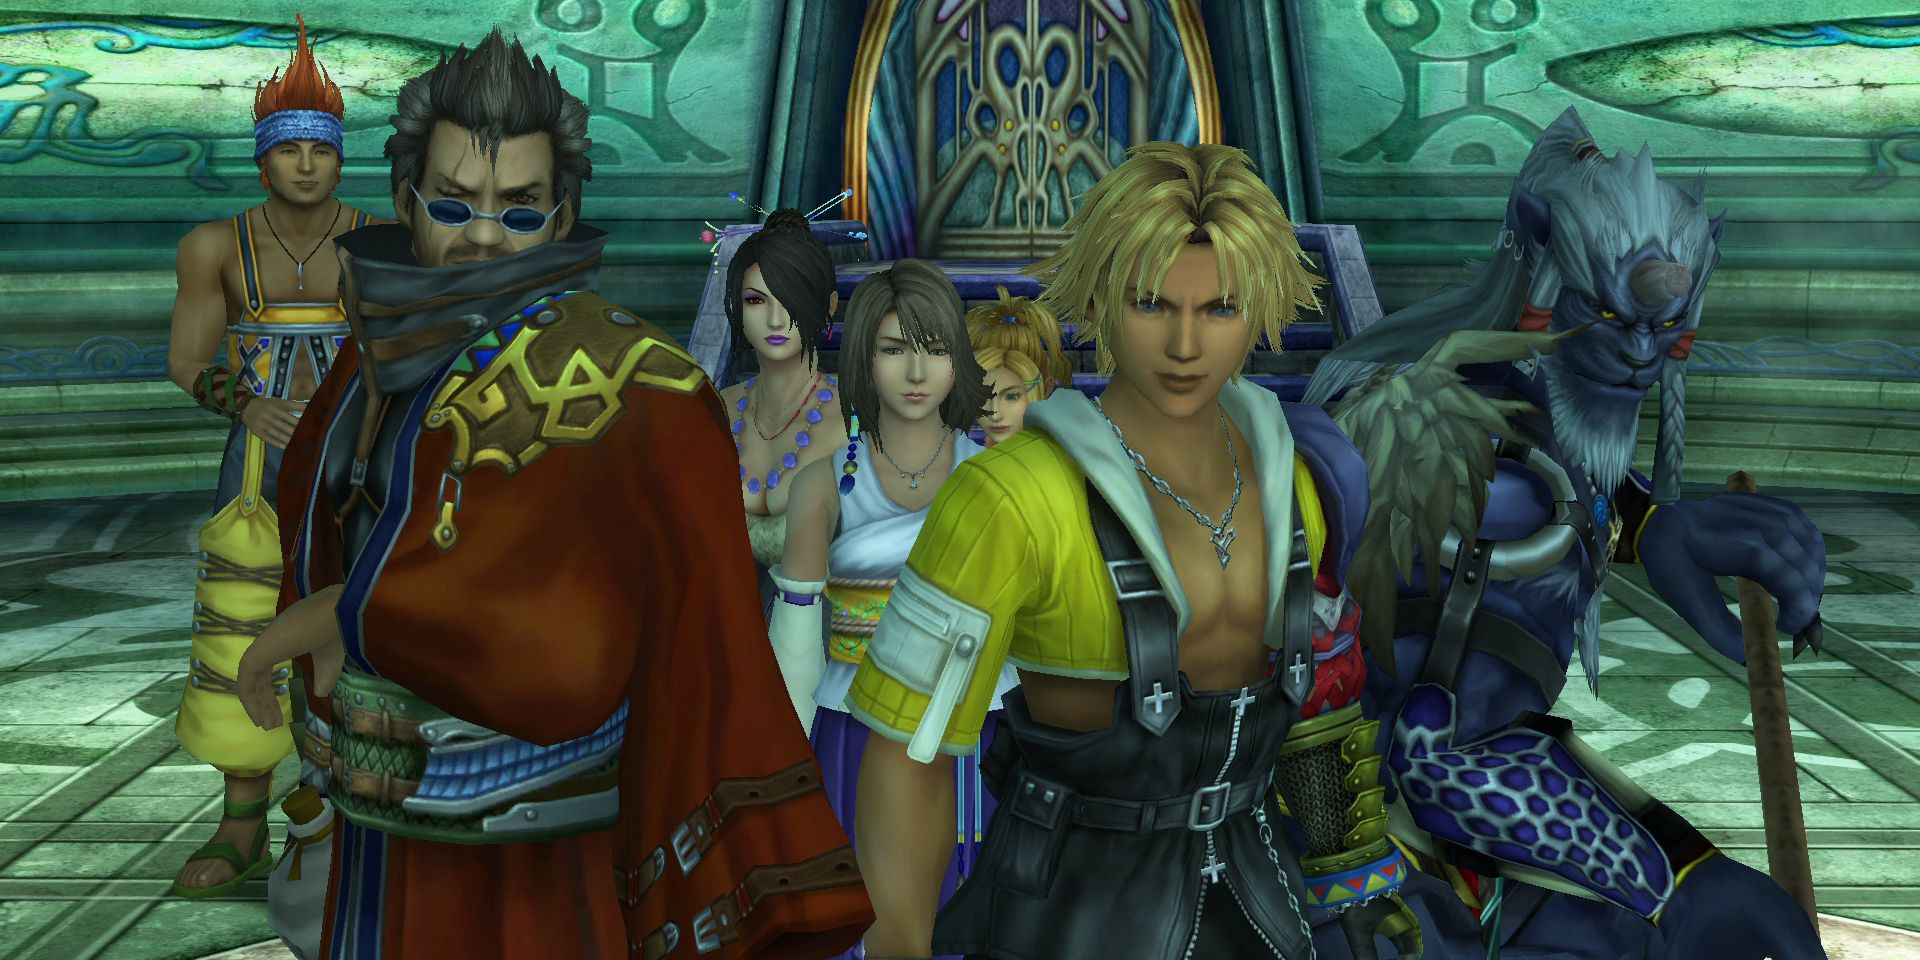 The main cast of Final Fantasy X led by Tidus